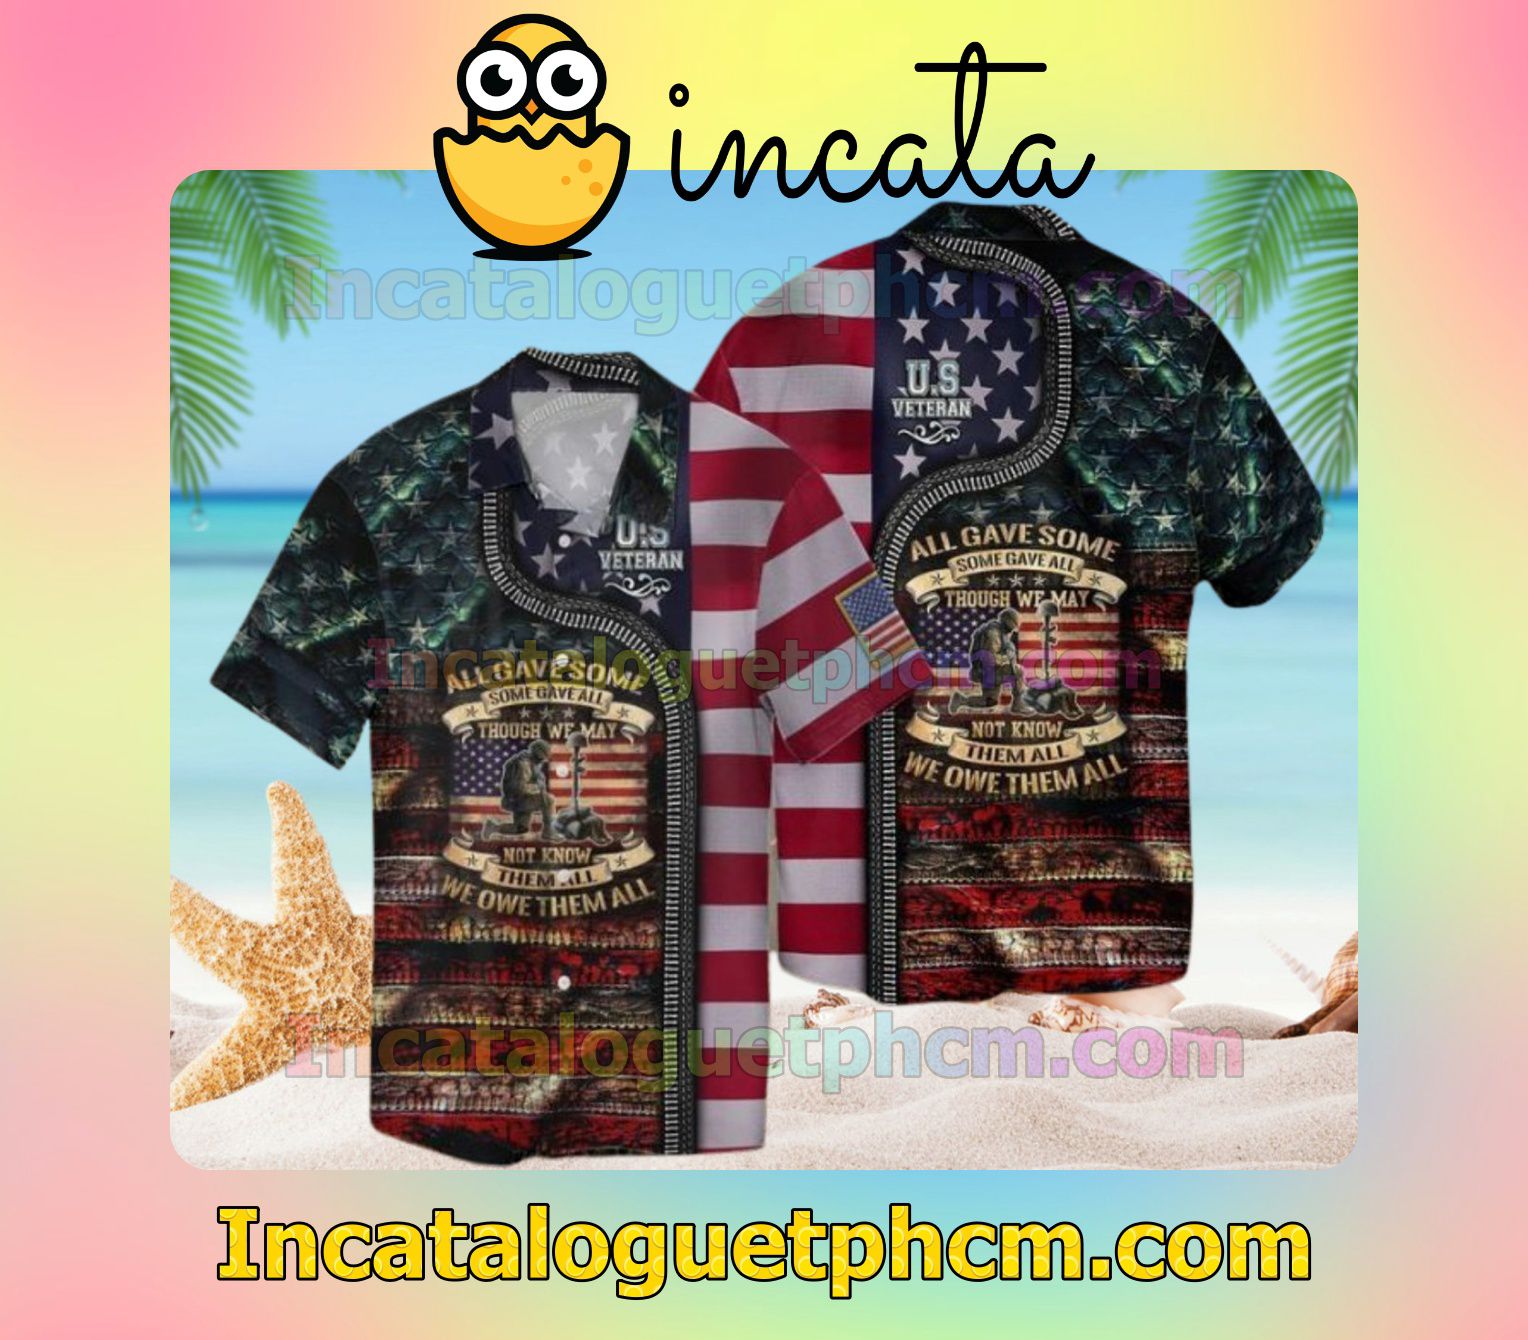 4th Of July Independence Day Memorial Day All Gave Some Owe Owe Them All Beach Shirt